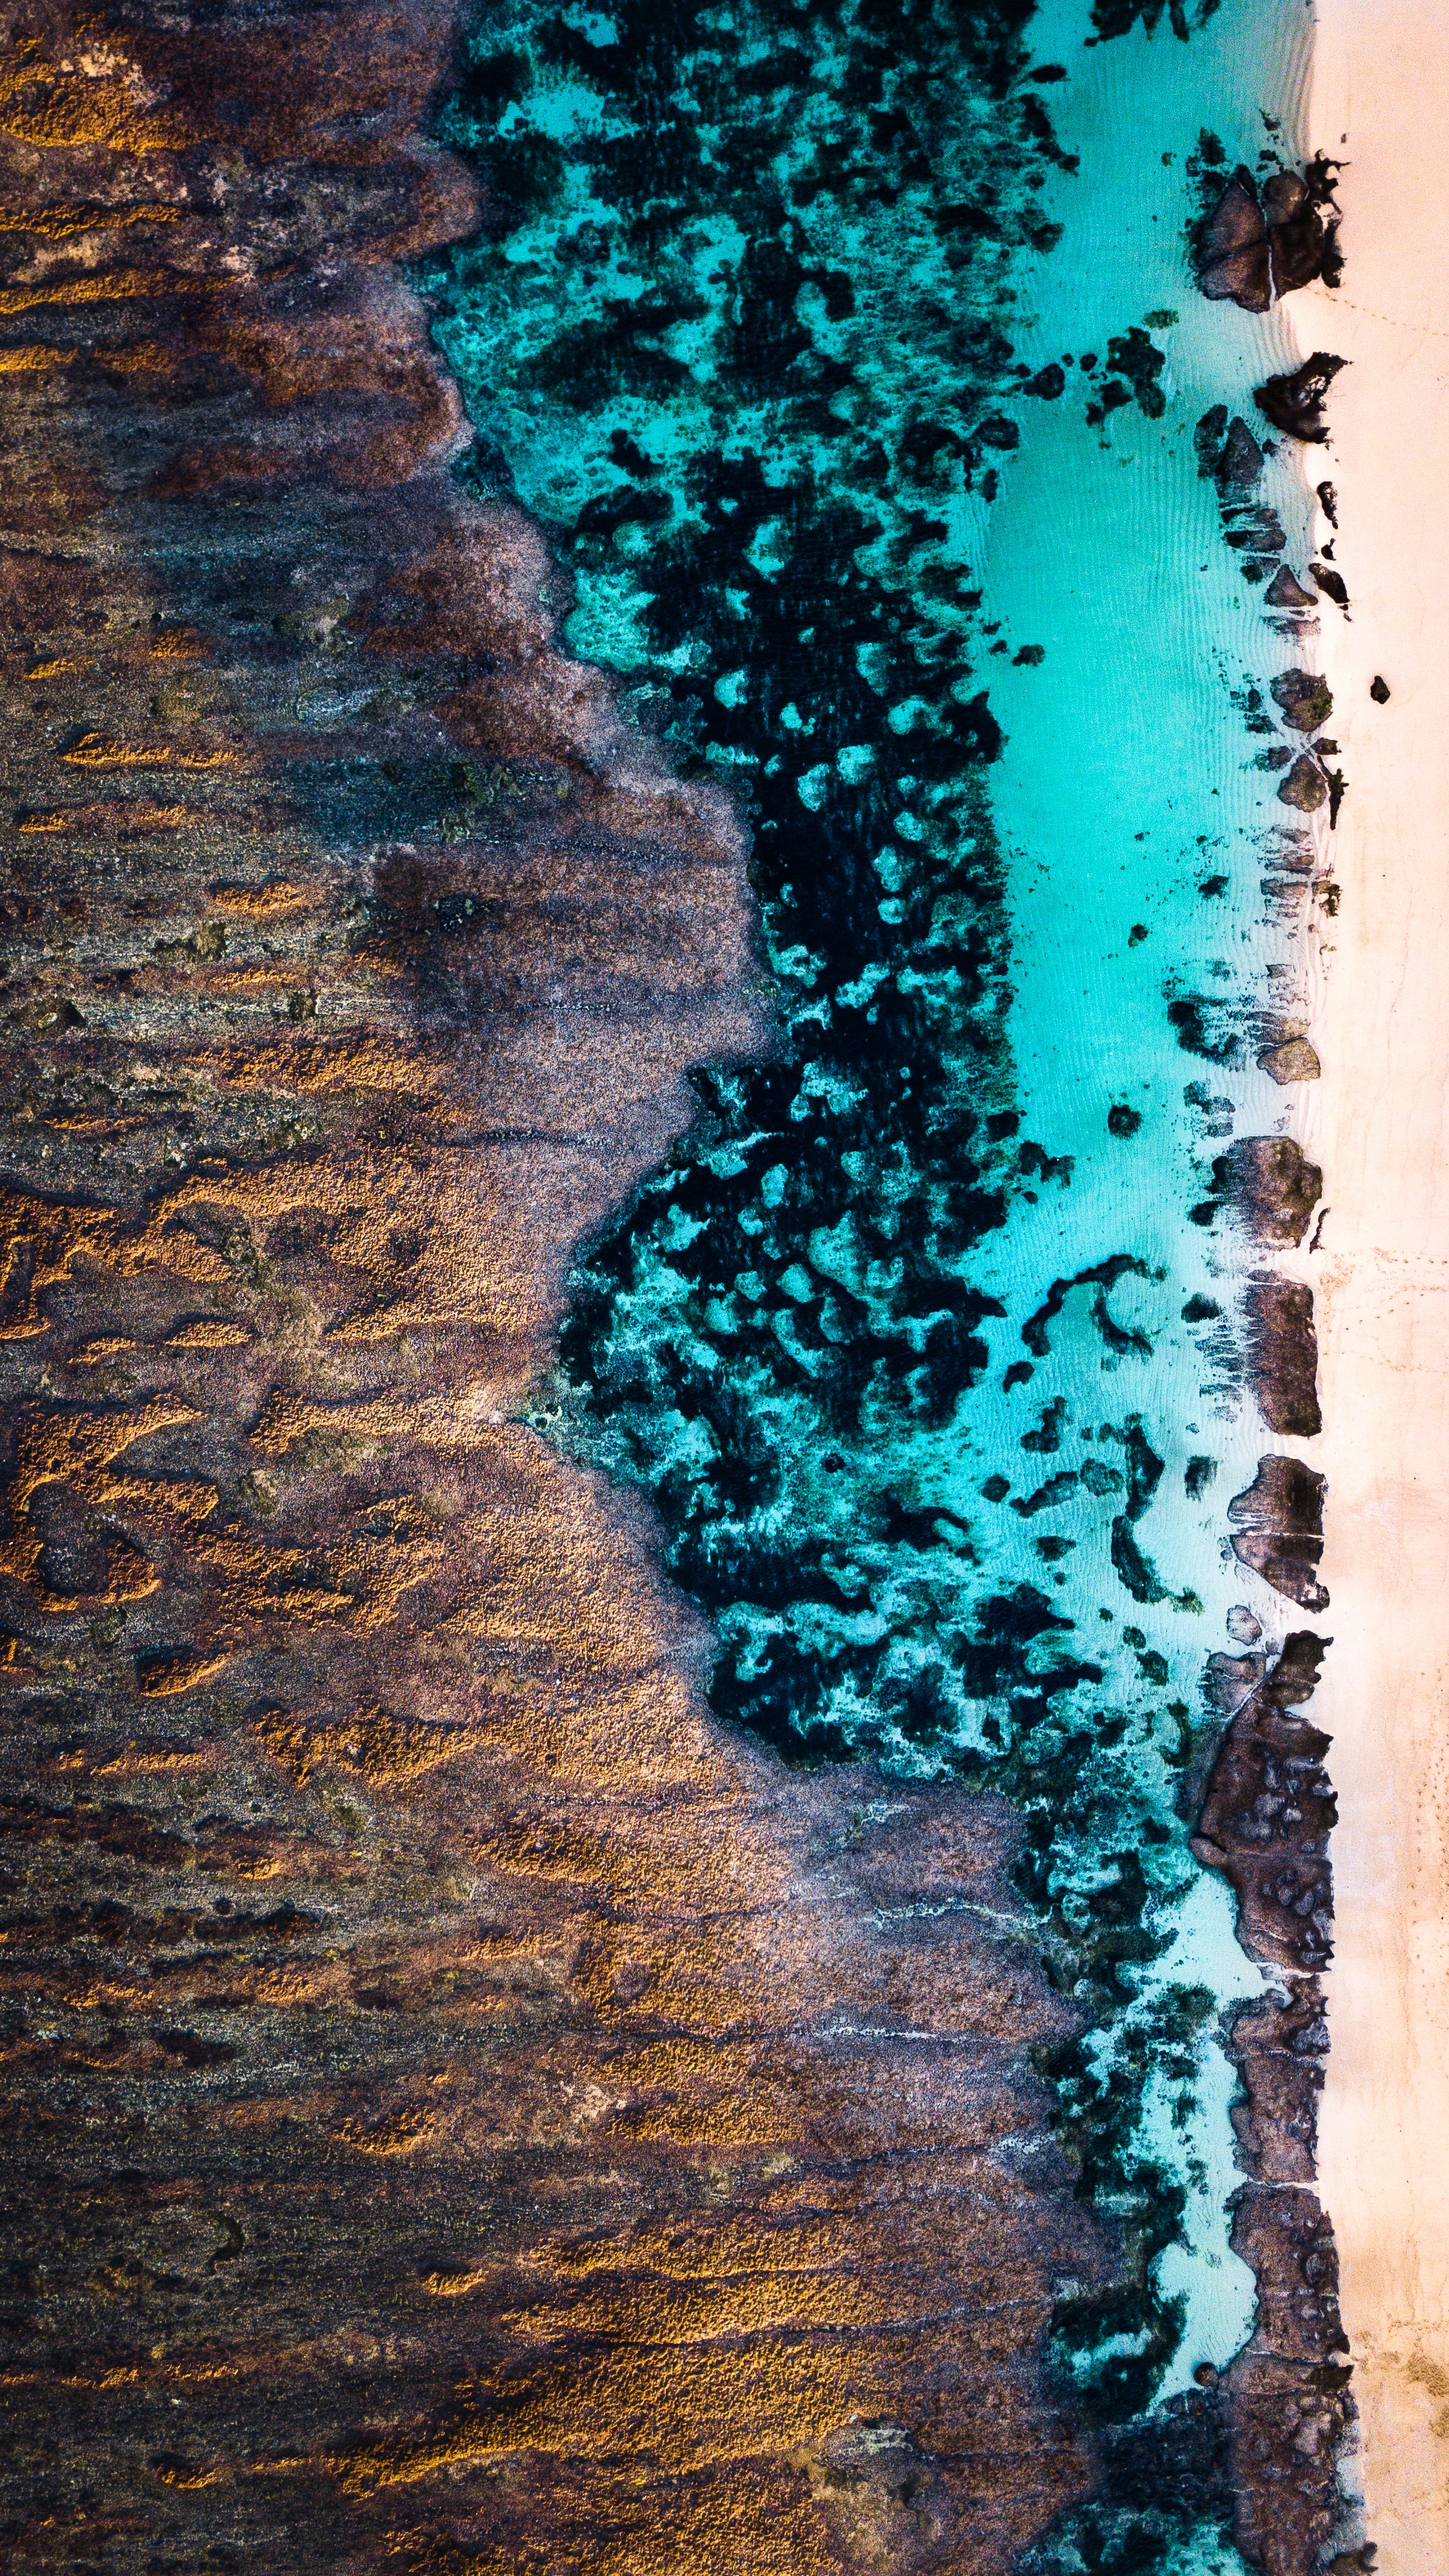 sand, nature, water, view from above, shore, bank, texture, ocean